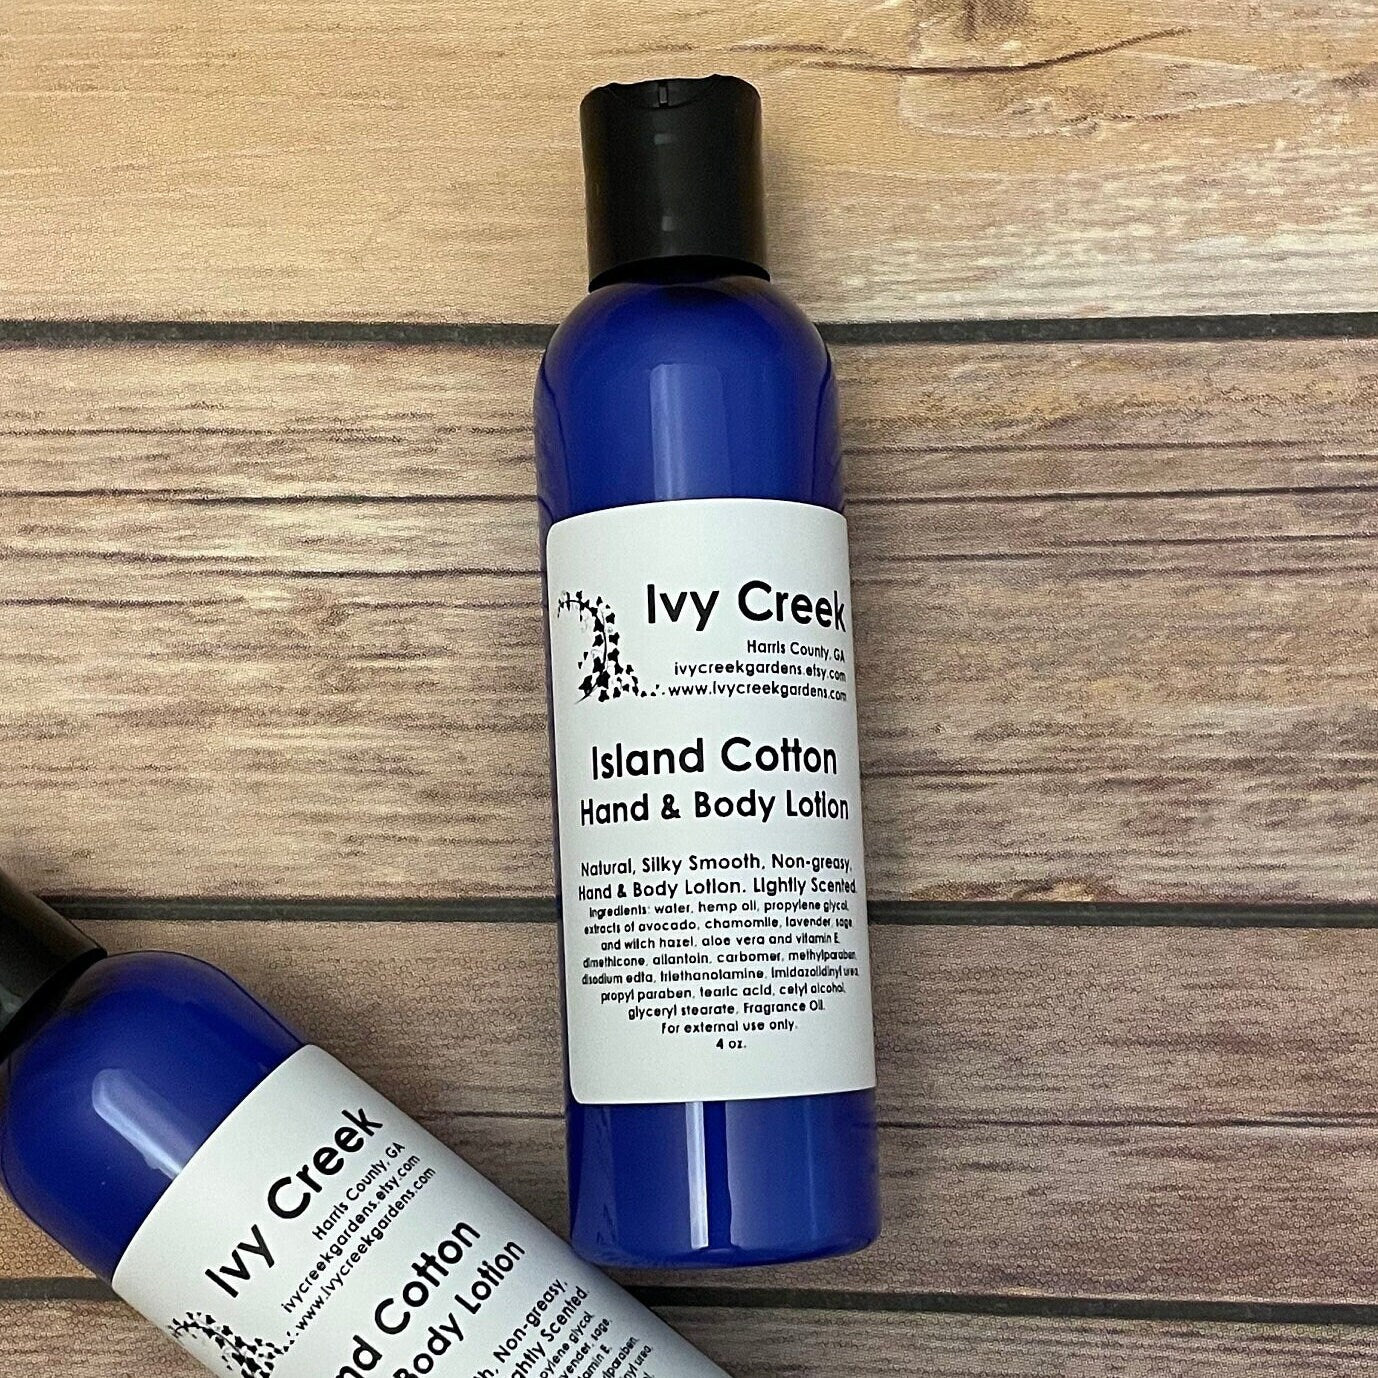 Ivy Creek Island Cotton Silky Smooth Hand & Body Lotion - All-Natural, Holistic, Lightly Scented - Ready to Ship - 4 oz